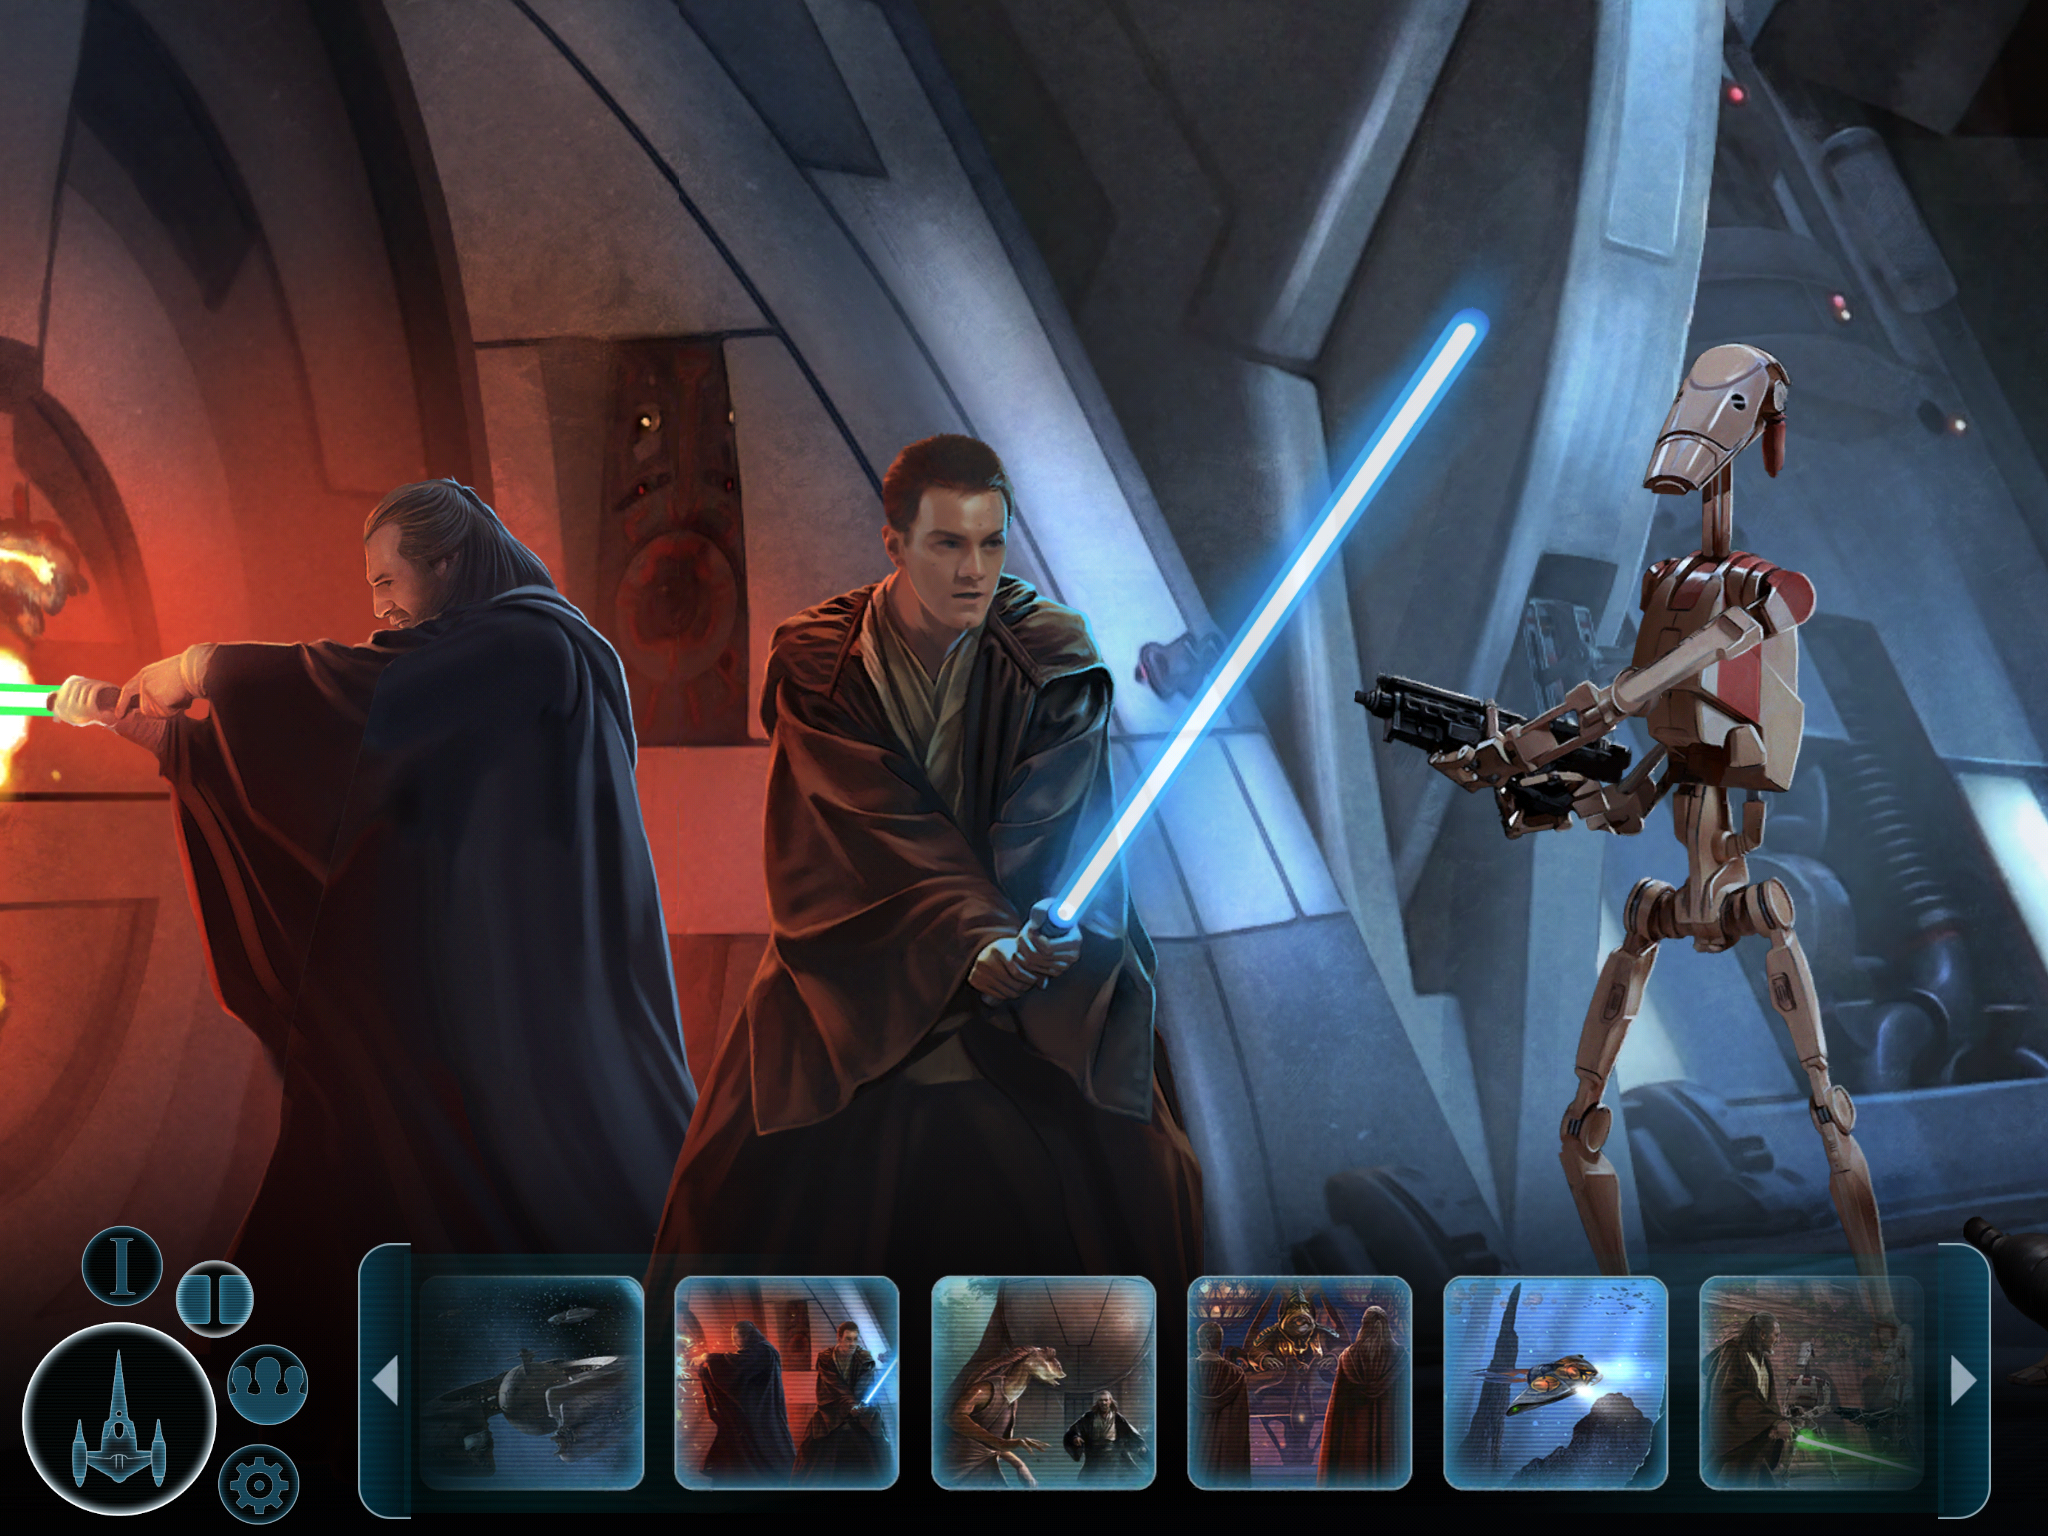 Disney Launches Star Wars Apps For Next Generation Of Fans